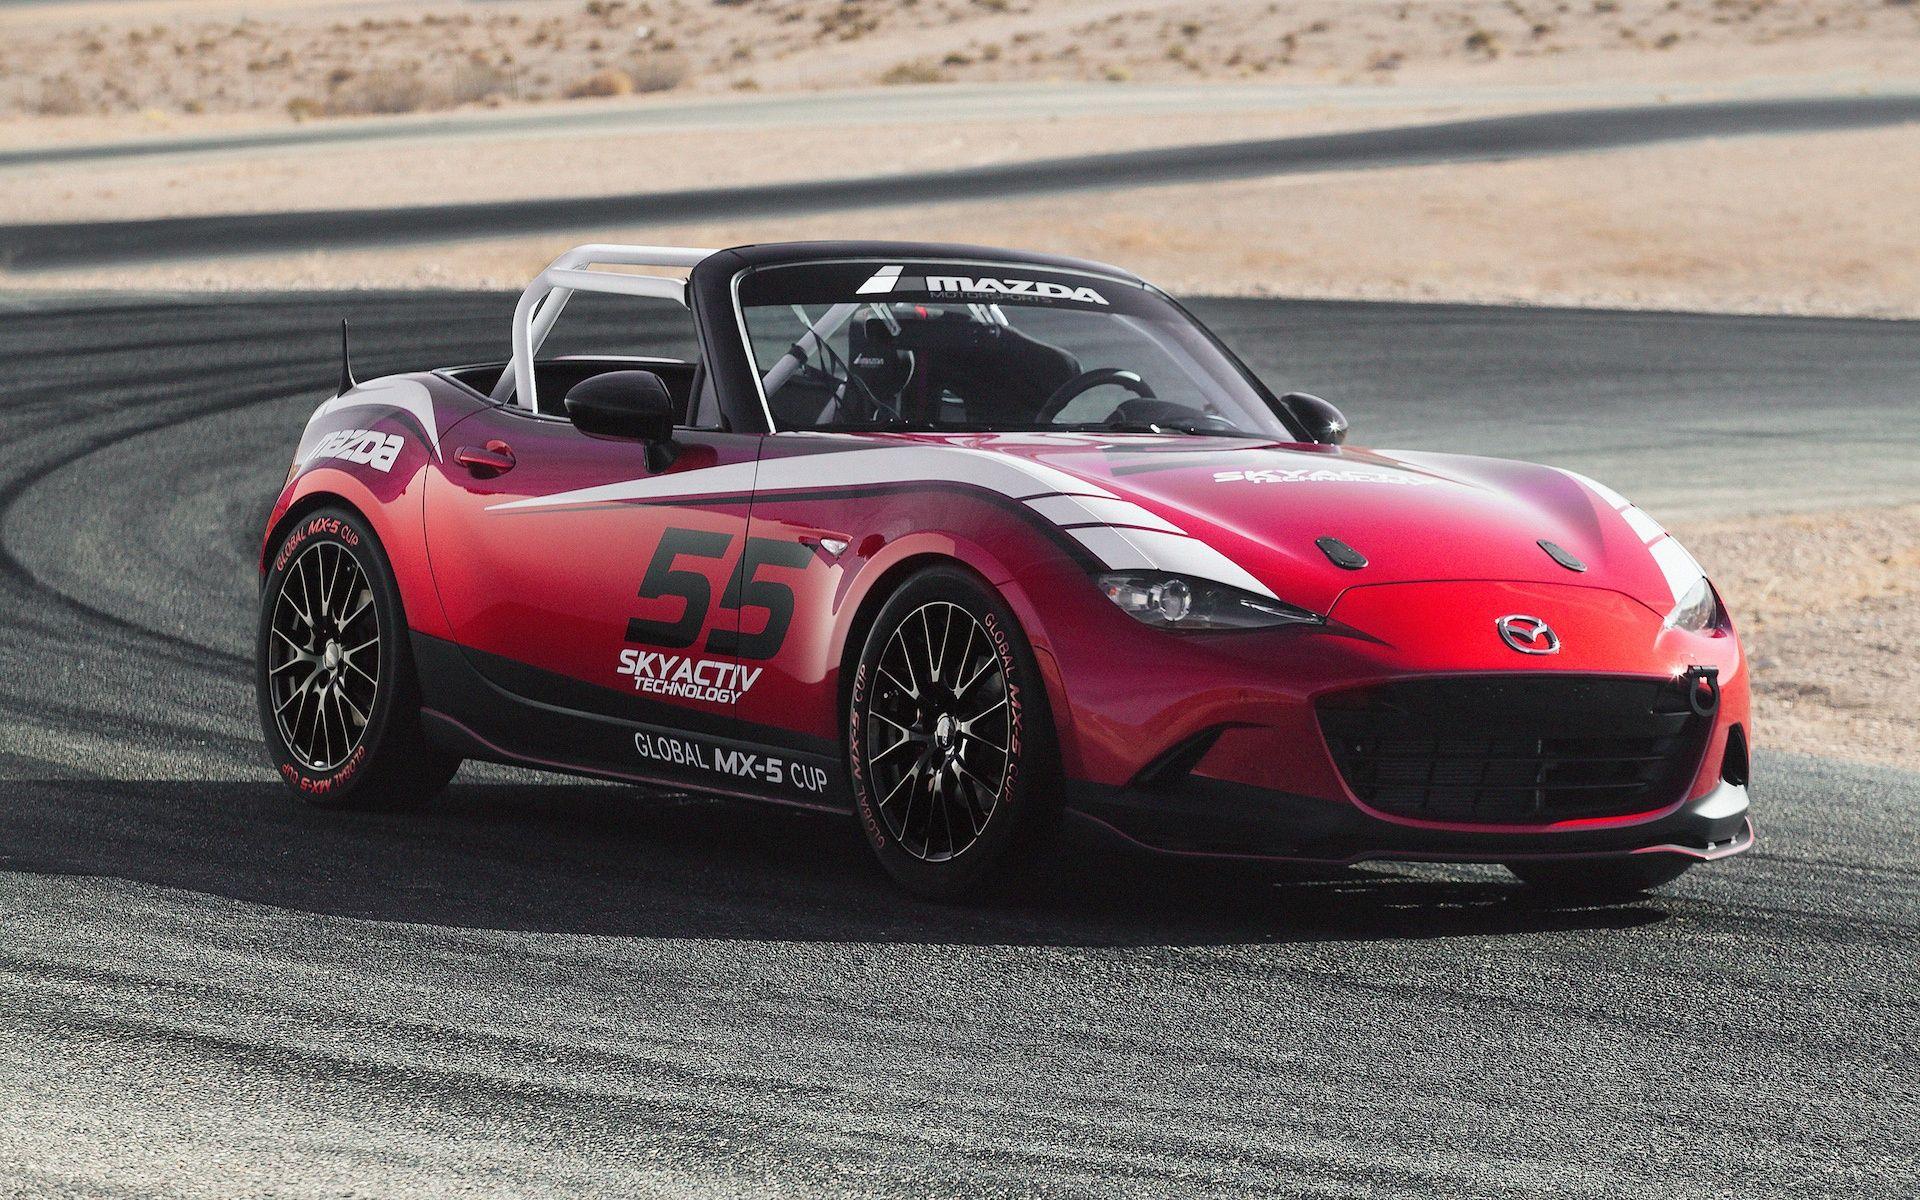 Red mazda mx 5 cup 2016